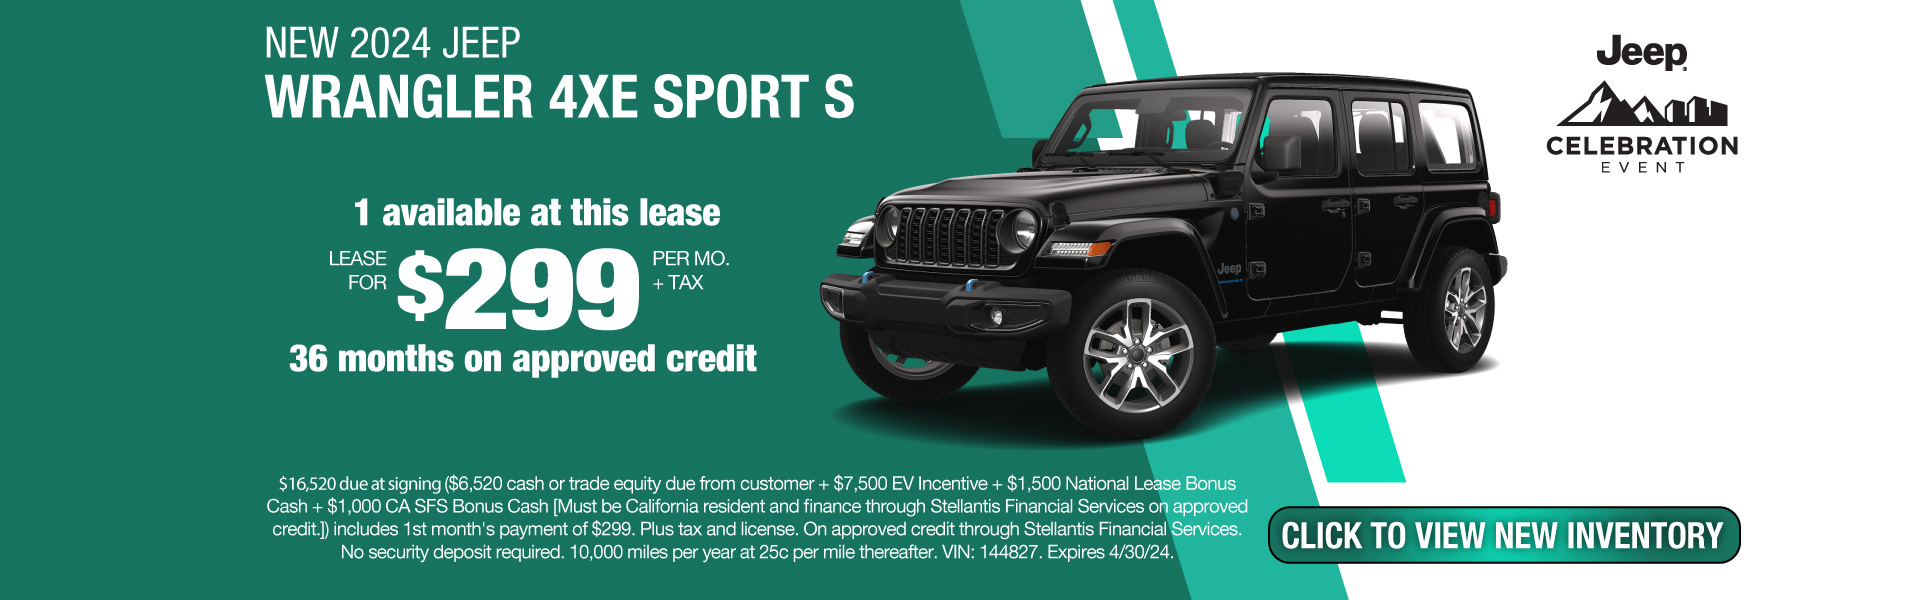 Lease a New 2024 Jeep Wrangler 4xe Sport S for $299 per month plus tax. Expires 4/30/24.